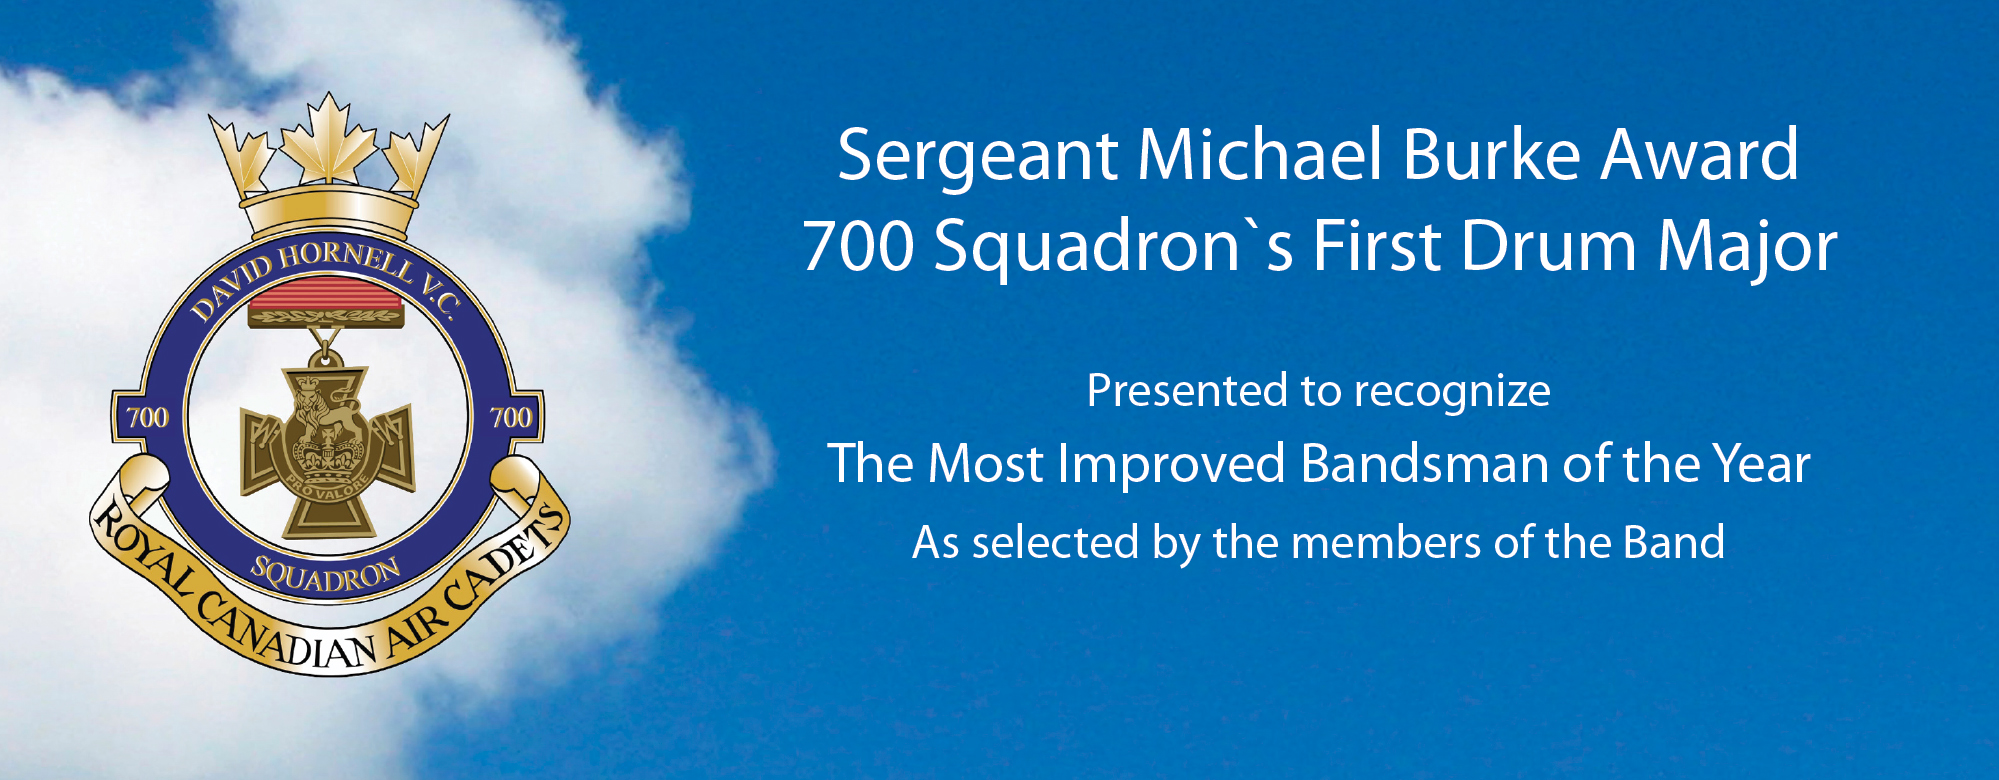 Sergeant Michael Burke Award 700 Squadron`s First Drum Major Presented to recognize The Most Improved Bandsman of the Year As selected by the members of the Band